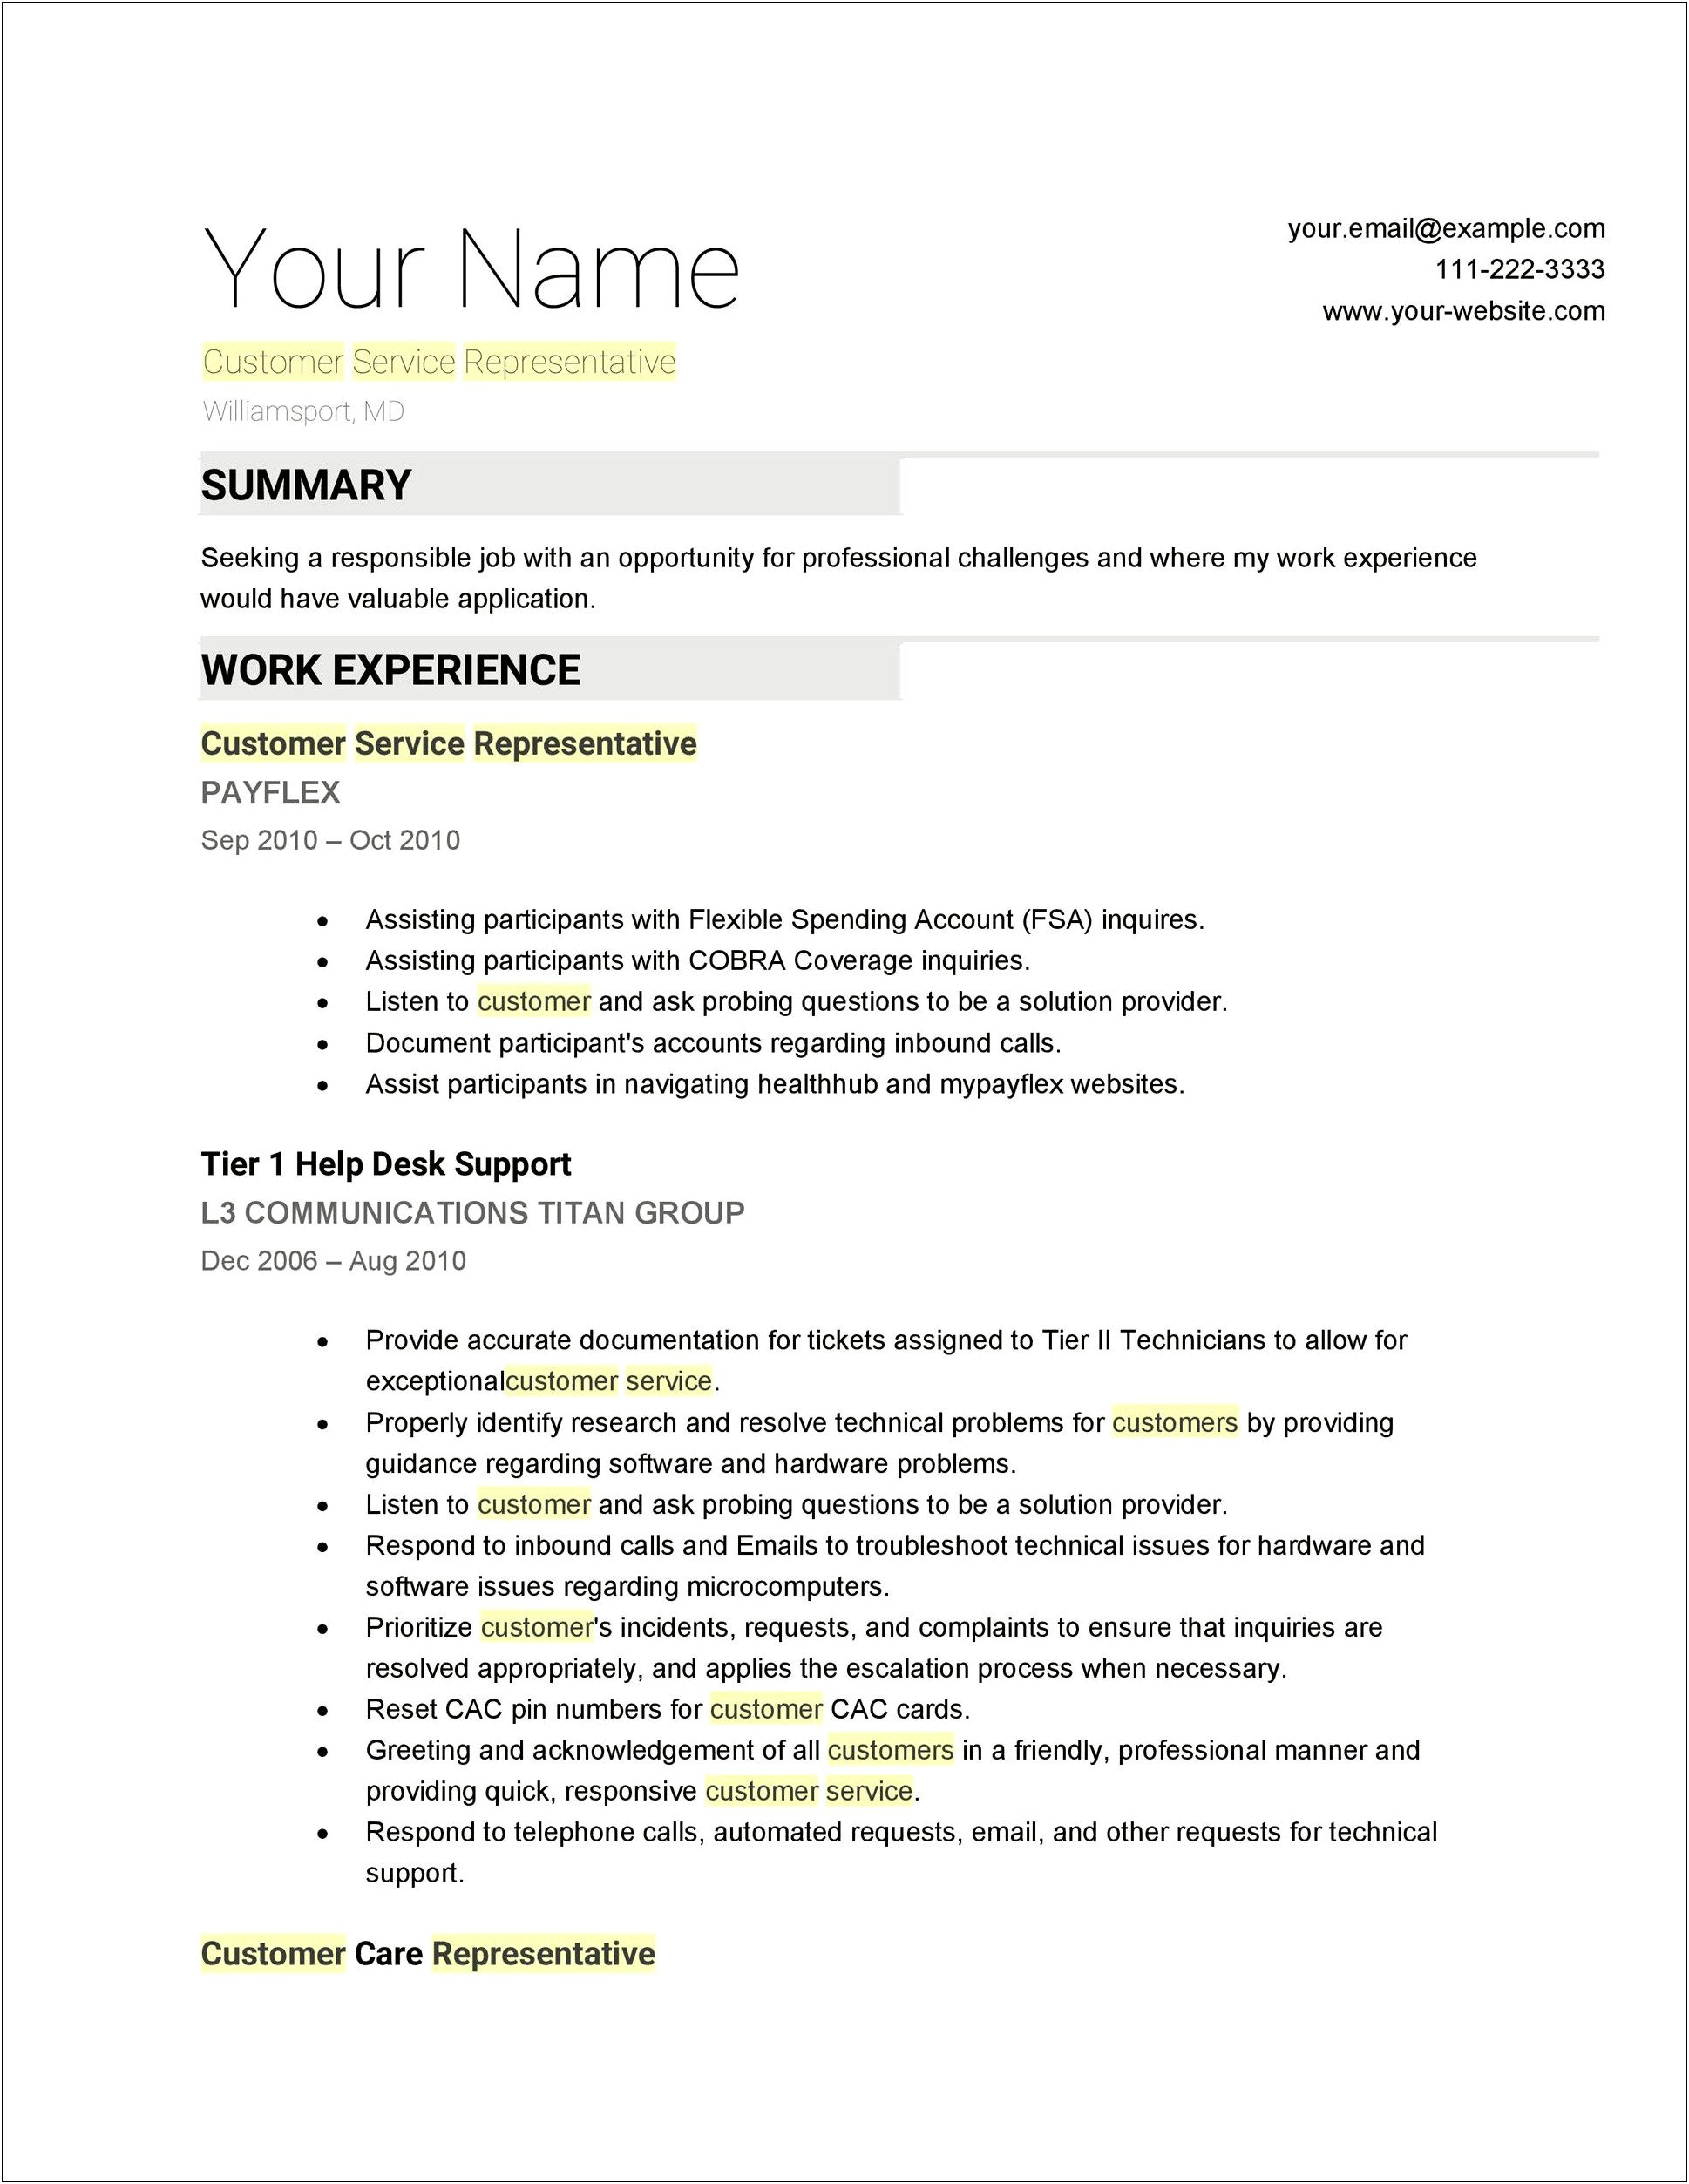 Good Resume Examples For Customer Service